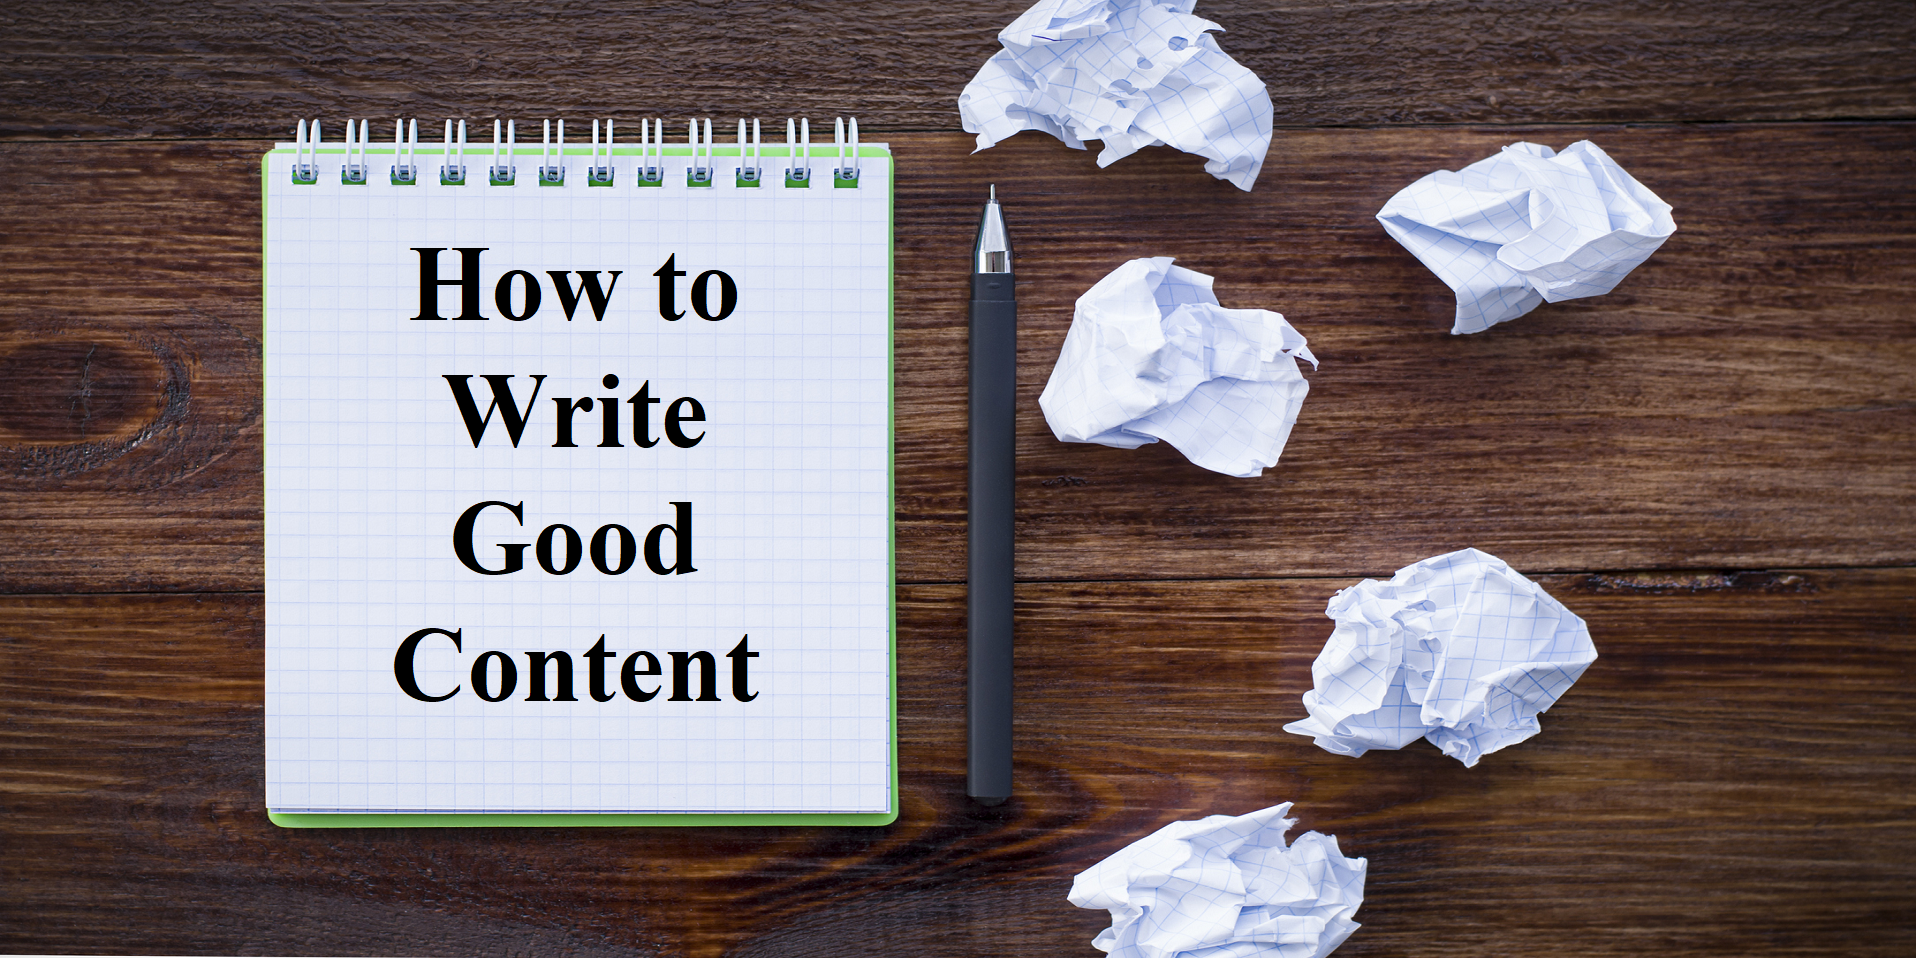 How to Write Good Content